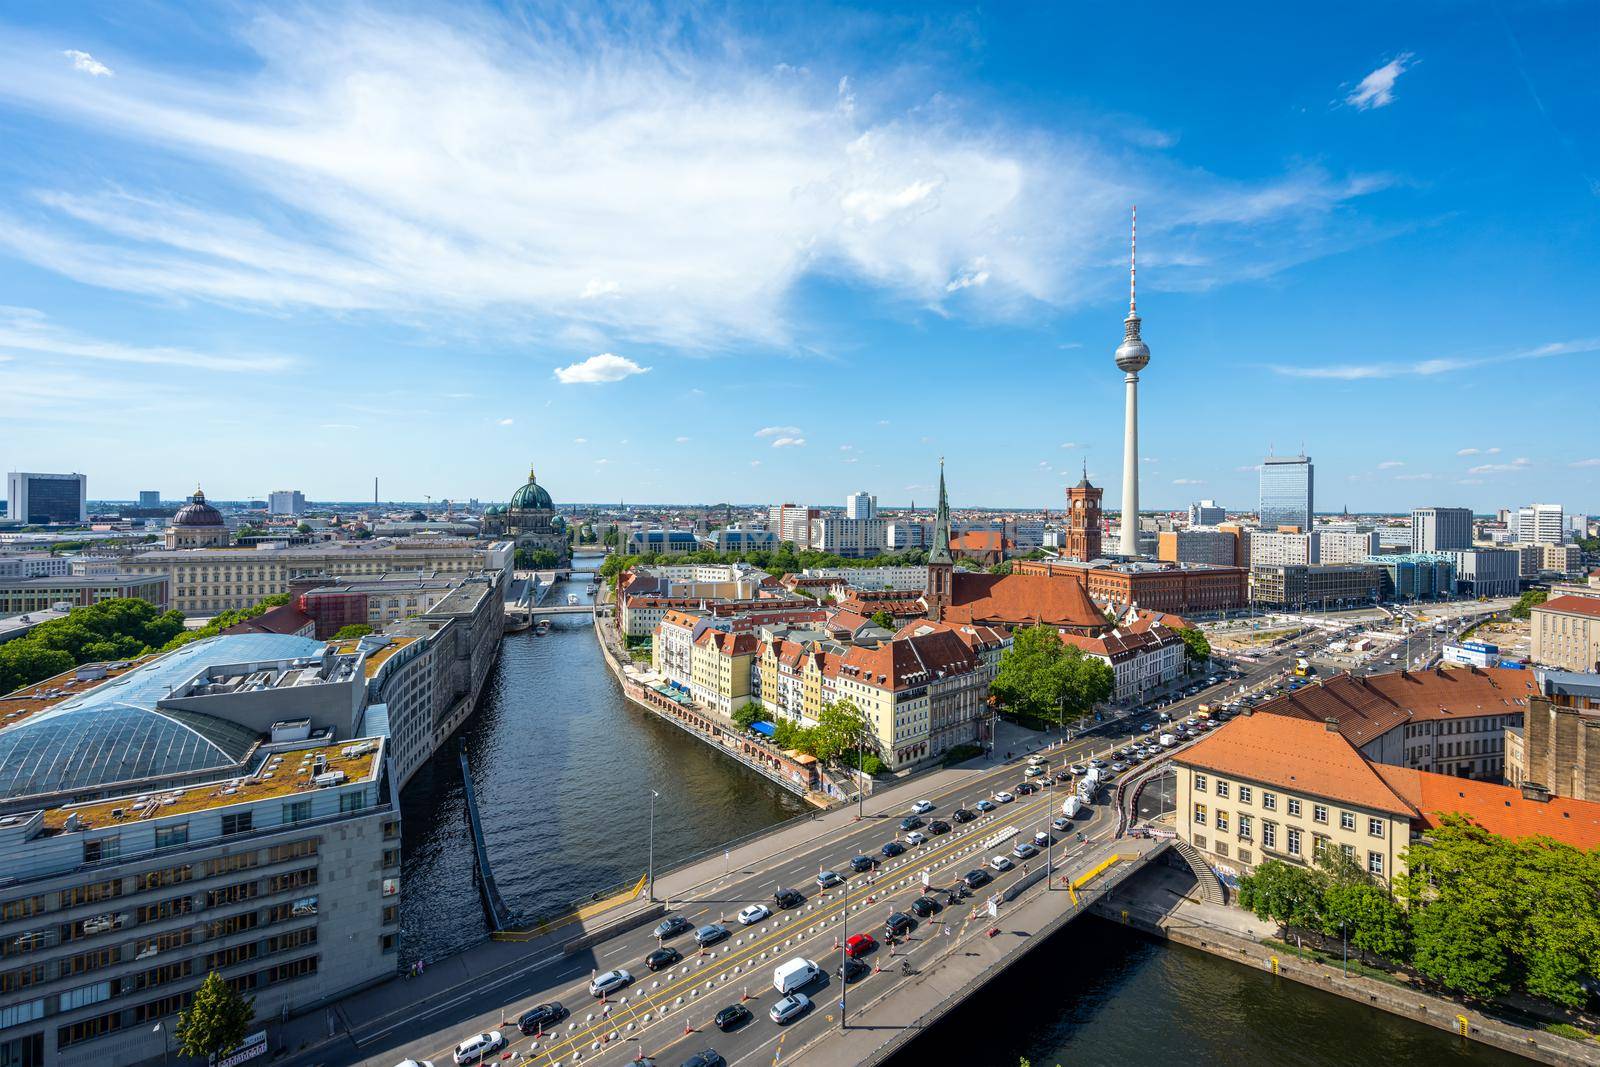 The center of Berlin with the iconic TV Tower by elxeneize